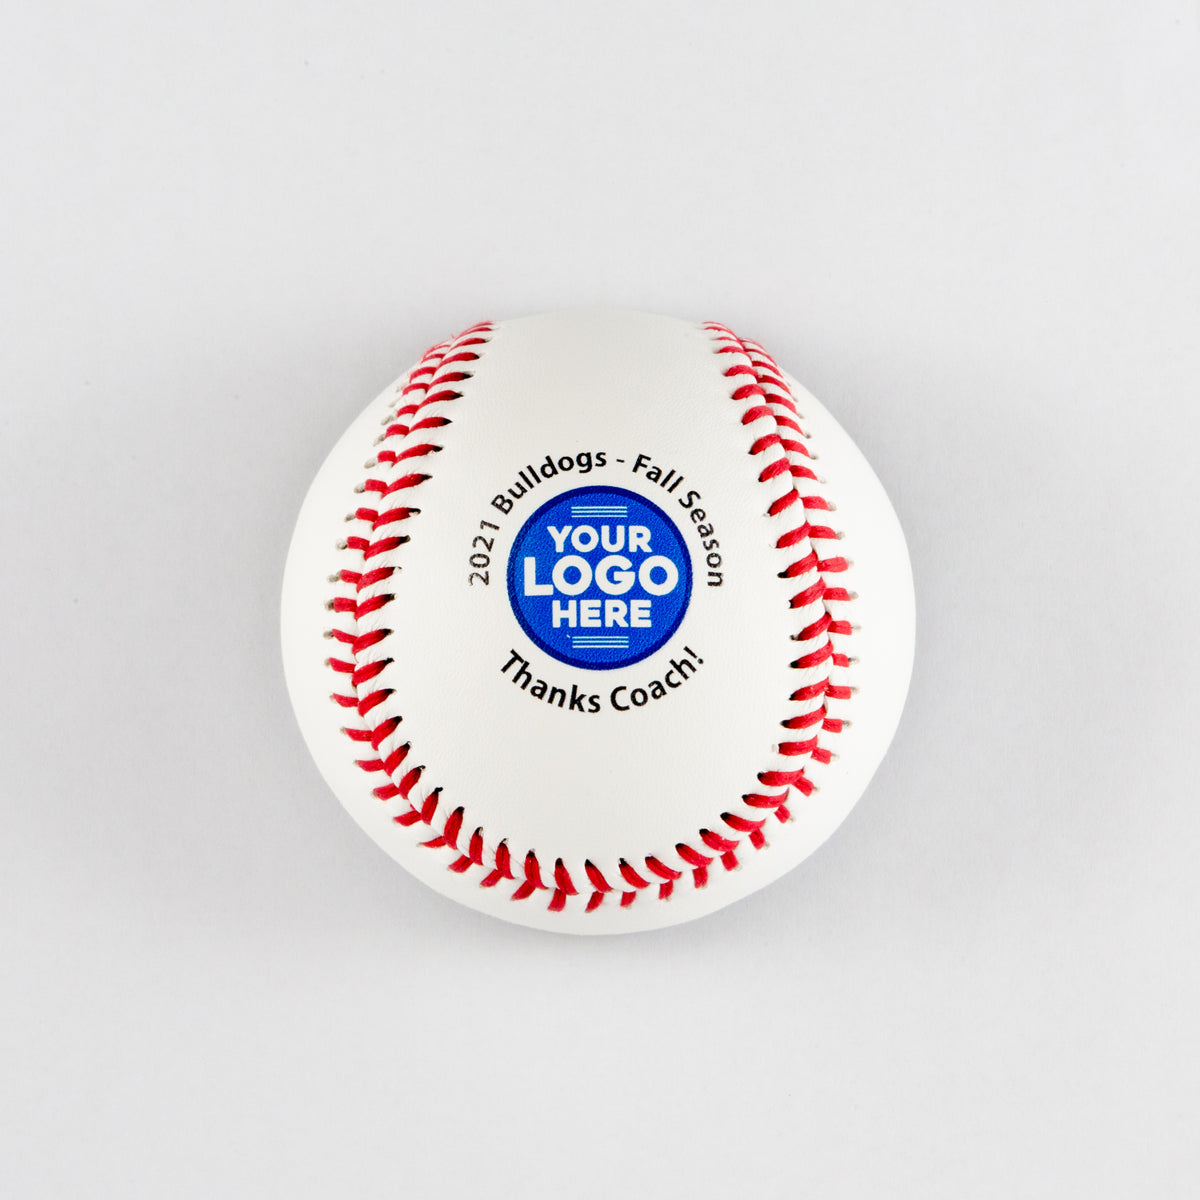 Printed Baseball with Text Surrounding Your Logo Here Design 